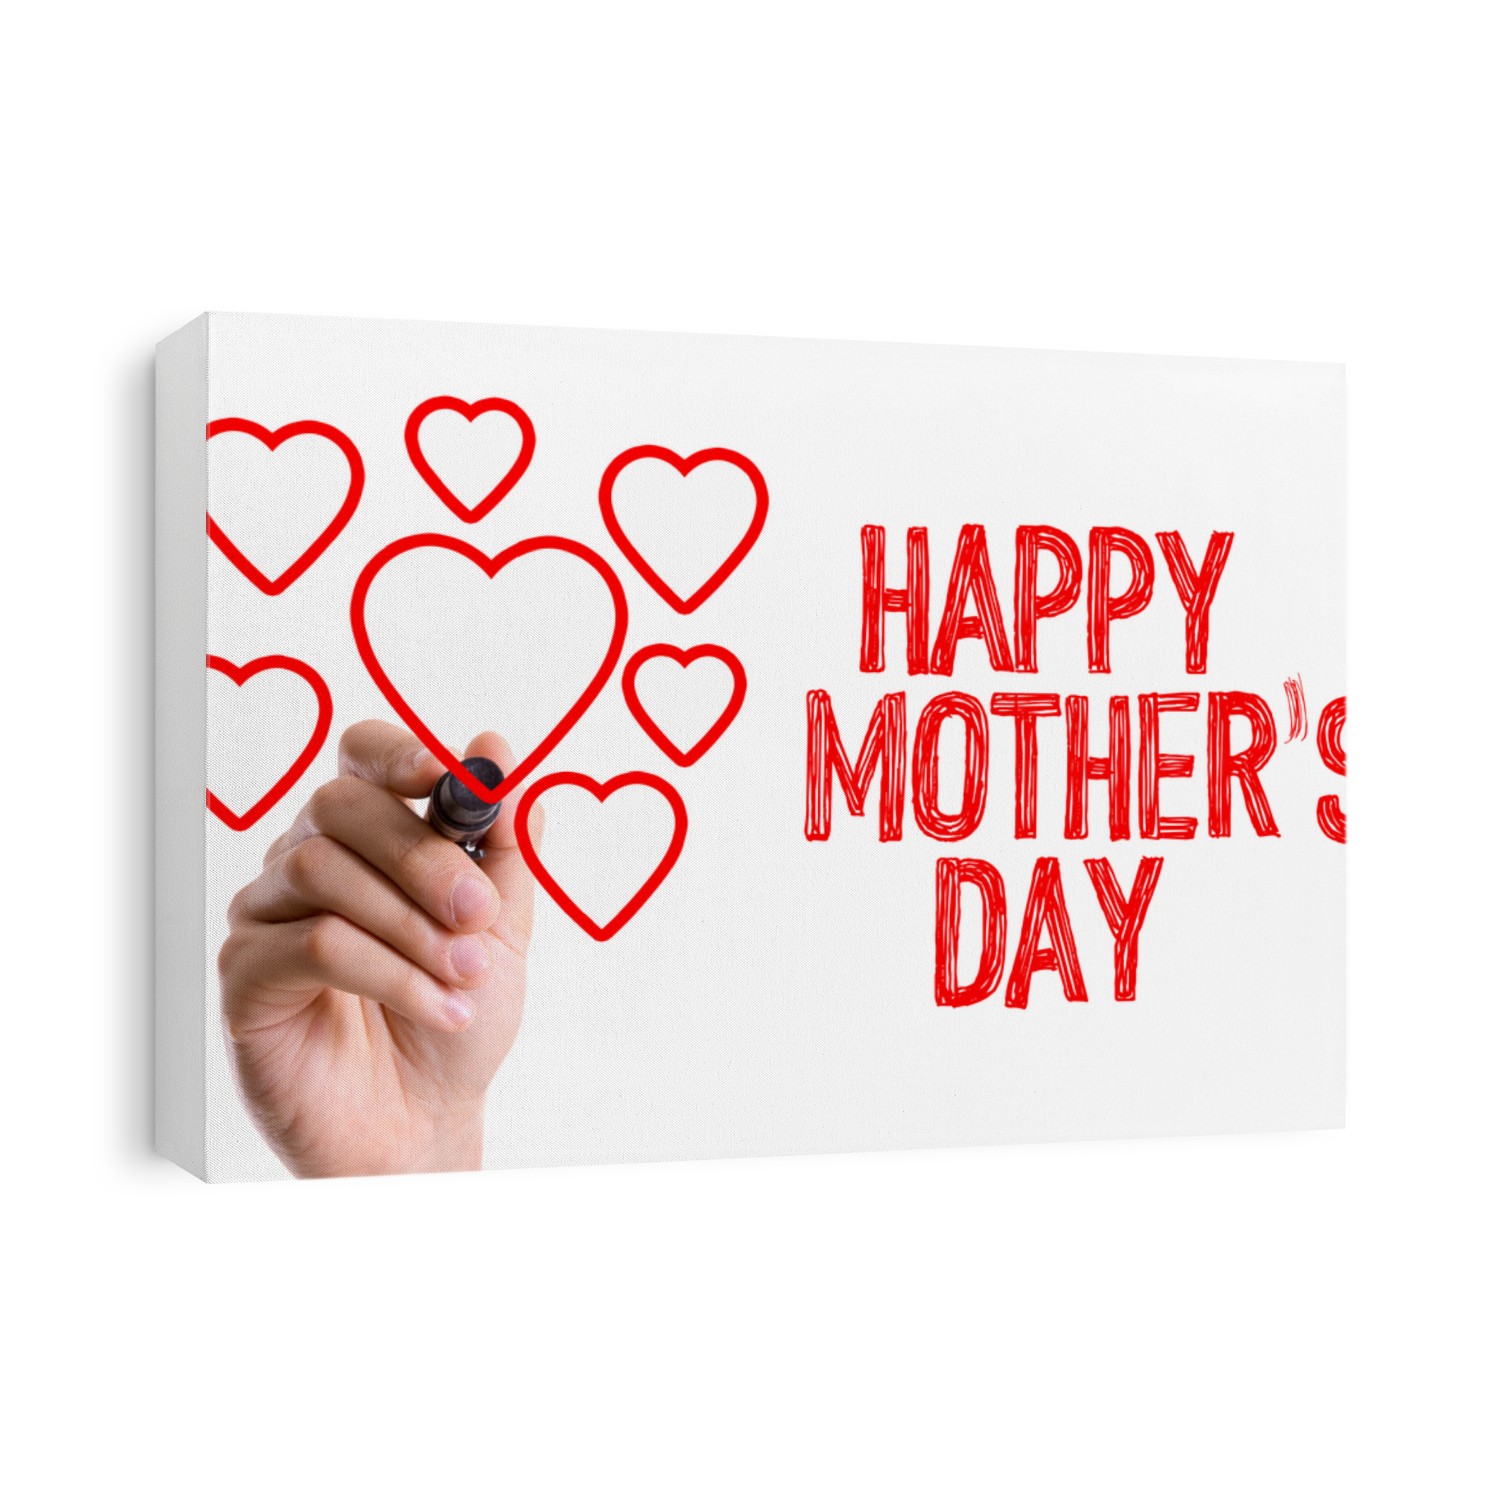 Hand with marker writing: Happy Mothers Day